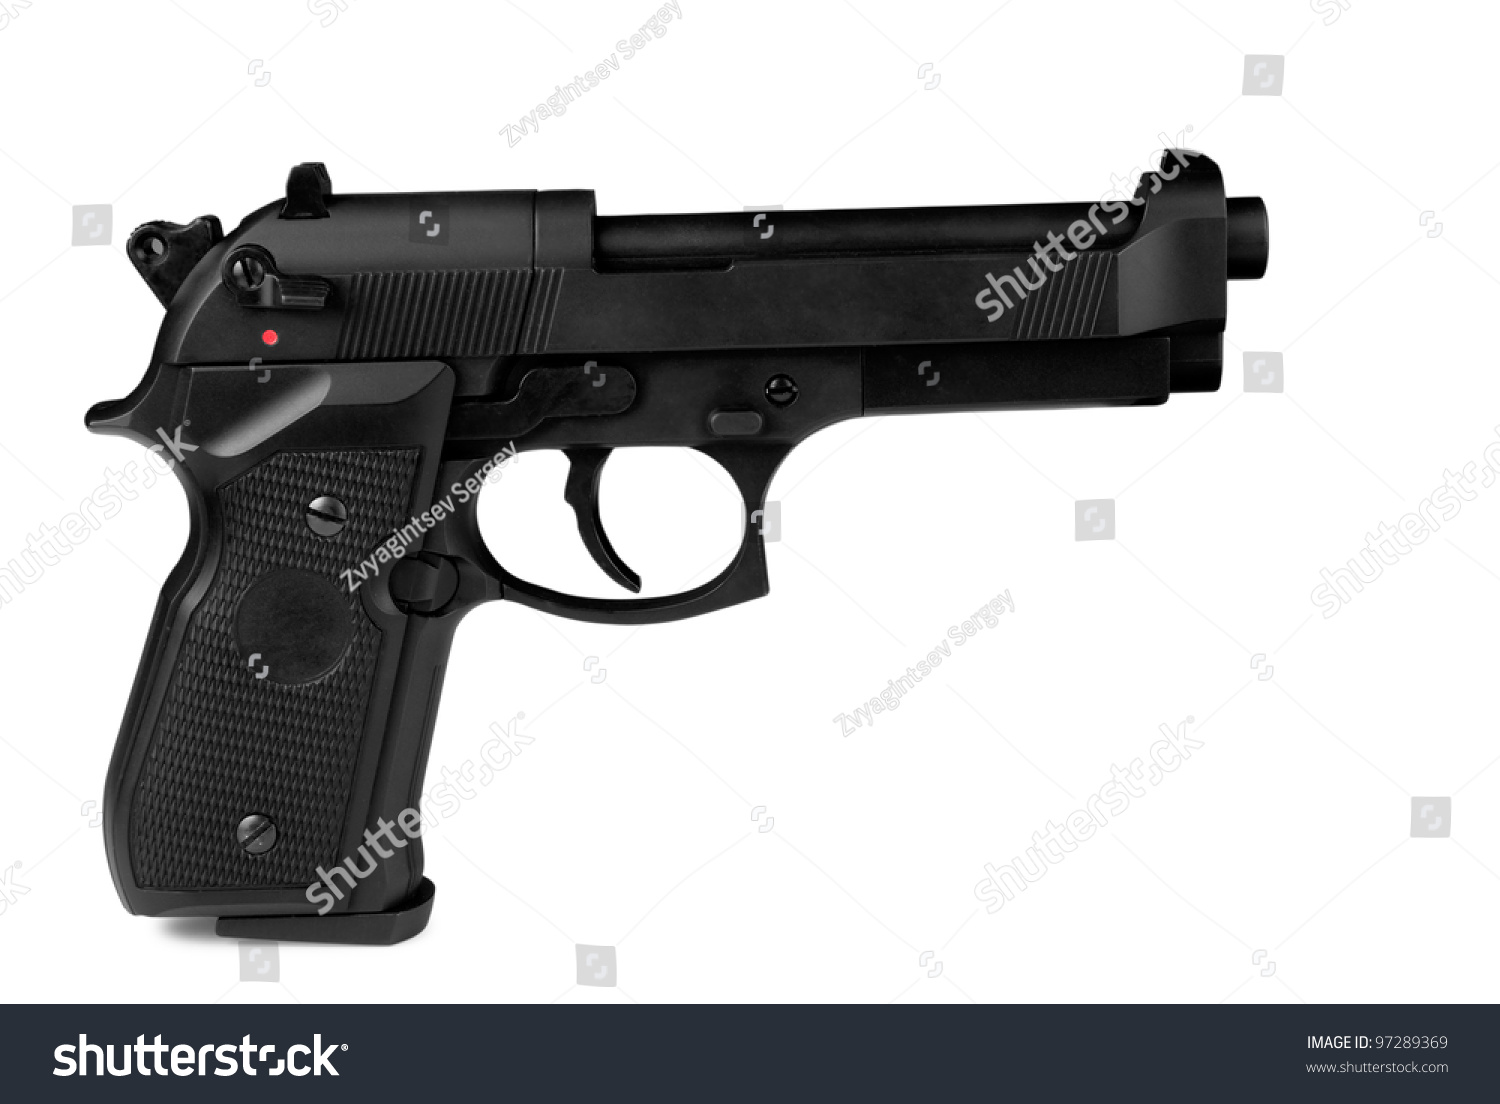 Gun Turn Right Isolated On A White Background Stock Photo 97289369